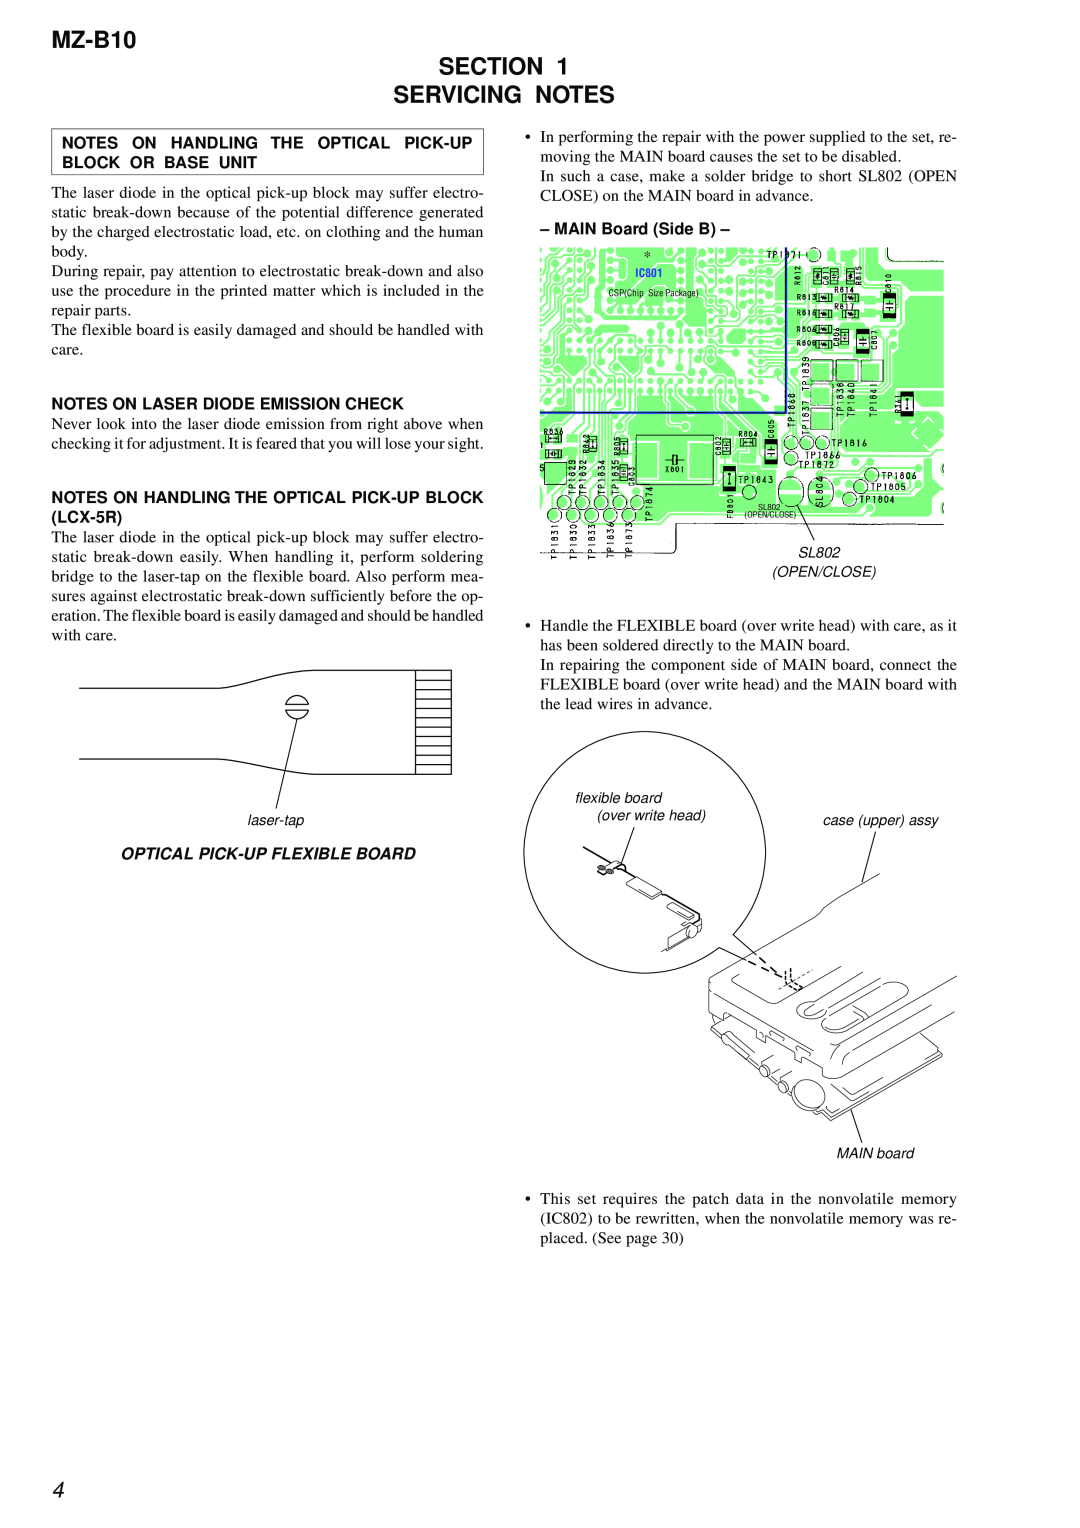 Sony service manual MZ-B10 SECTION SERVICING NOTES, Notes On Laser Diode Emission Check, MAIN Board Side B 